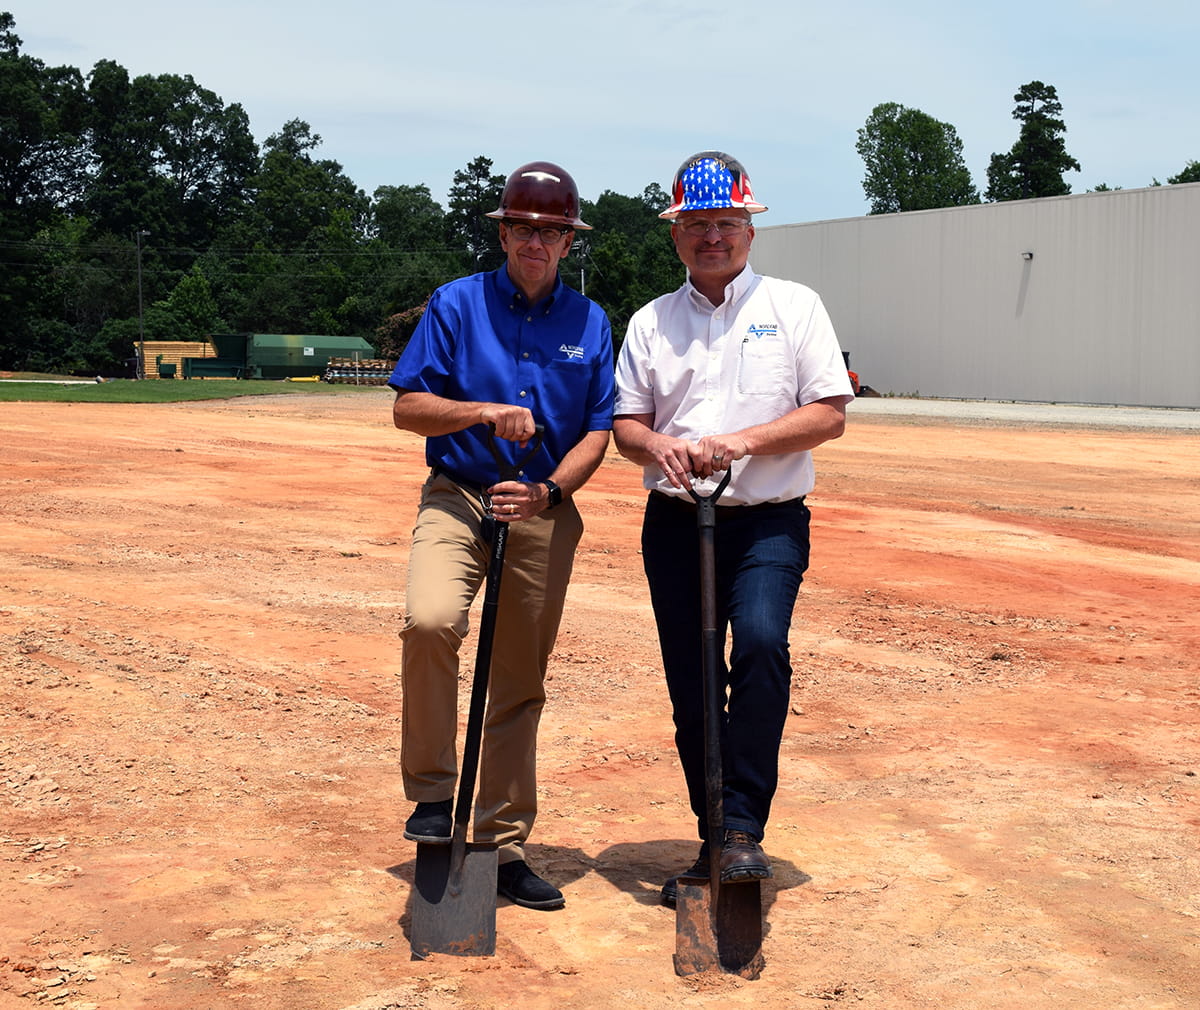 Erik Olshall, Nordfab Americas President, and Rick Doss, Nordfab Americas Director of Operations, at Nordfab Now groundbreaking